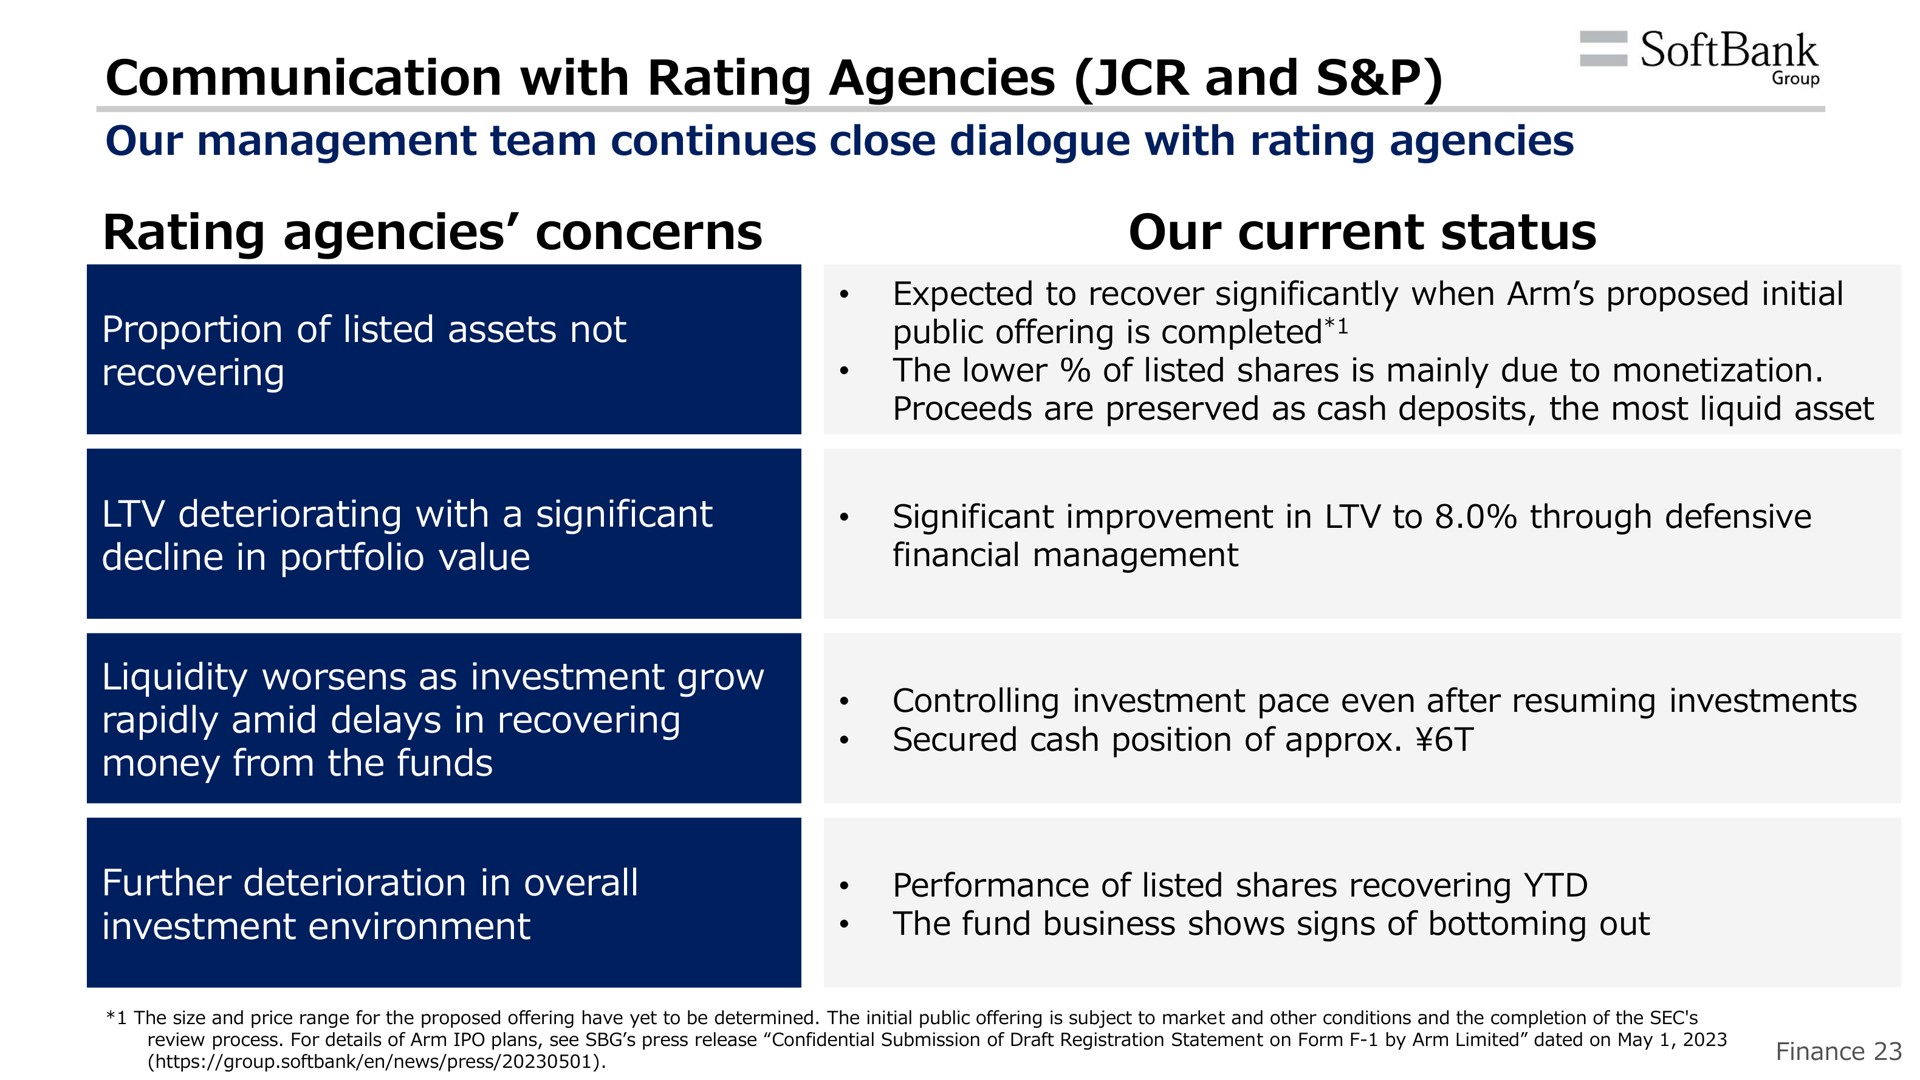 communication with rating agencies and rating agencies concerns our current status | SoftBank